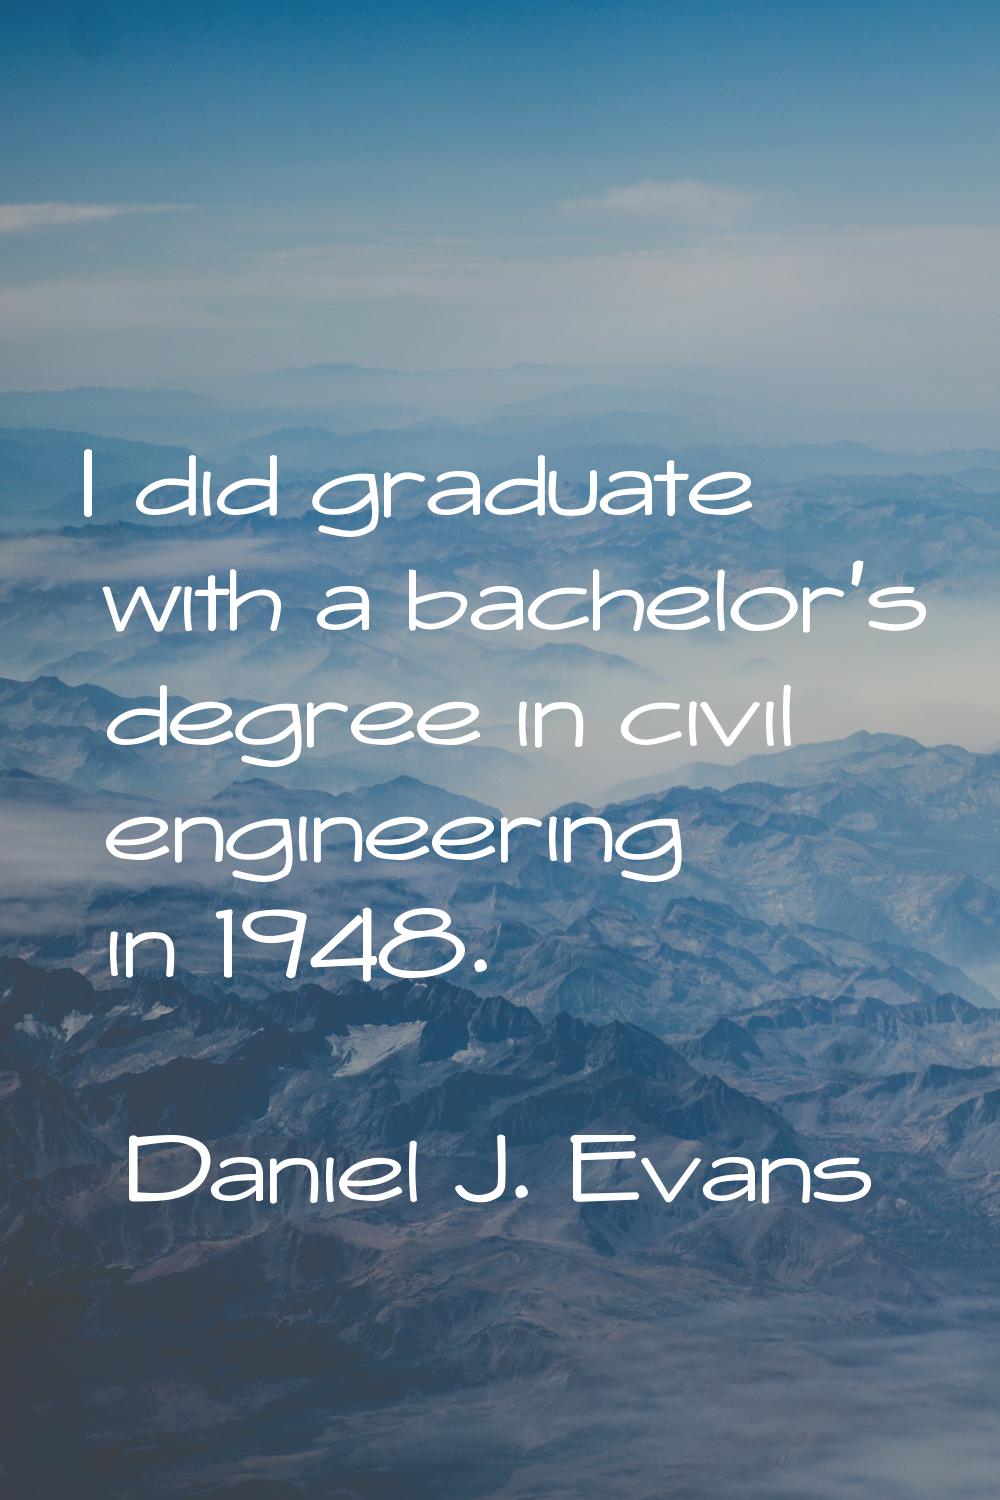 I did graduate with a bachelor's degree in civil engineering in 1948.